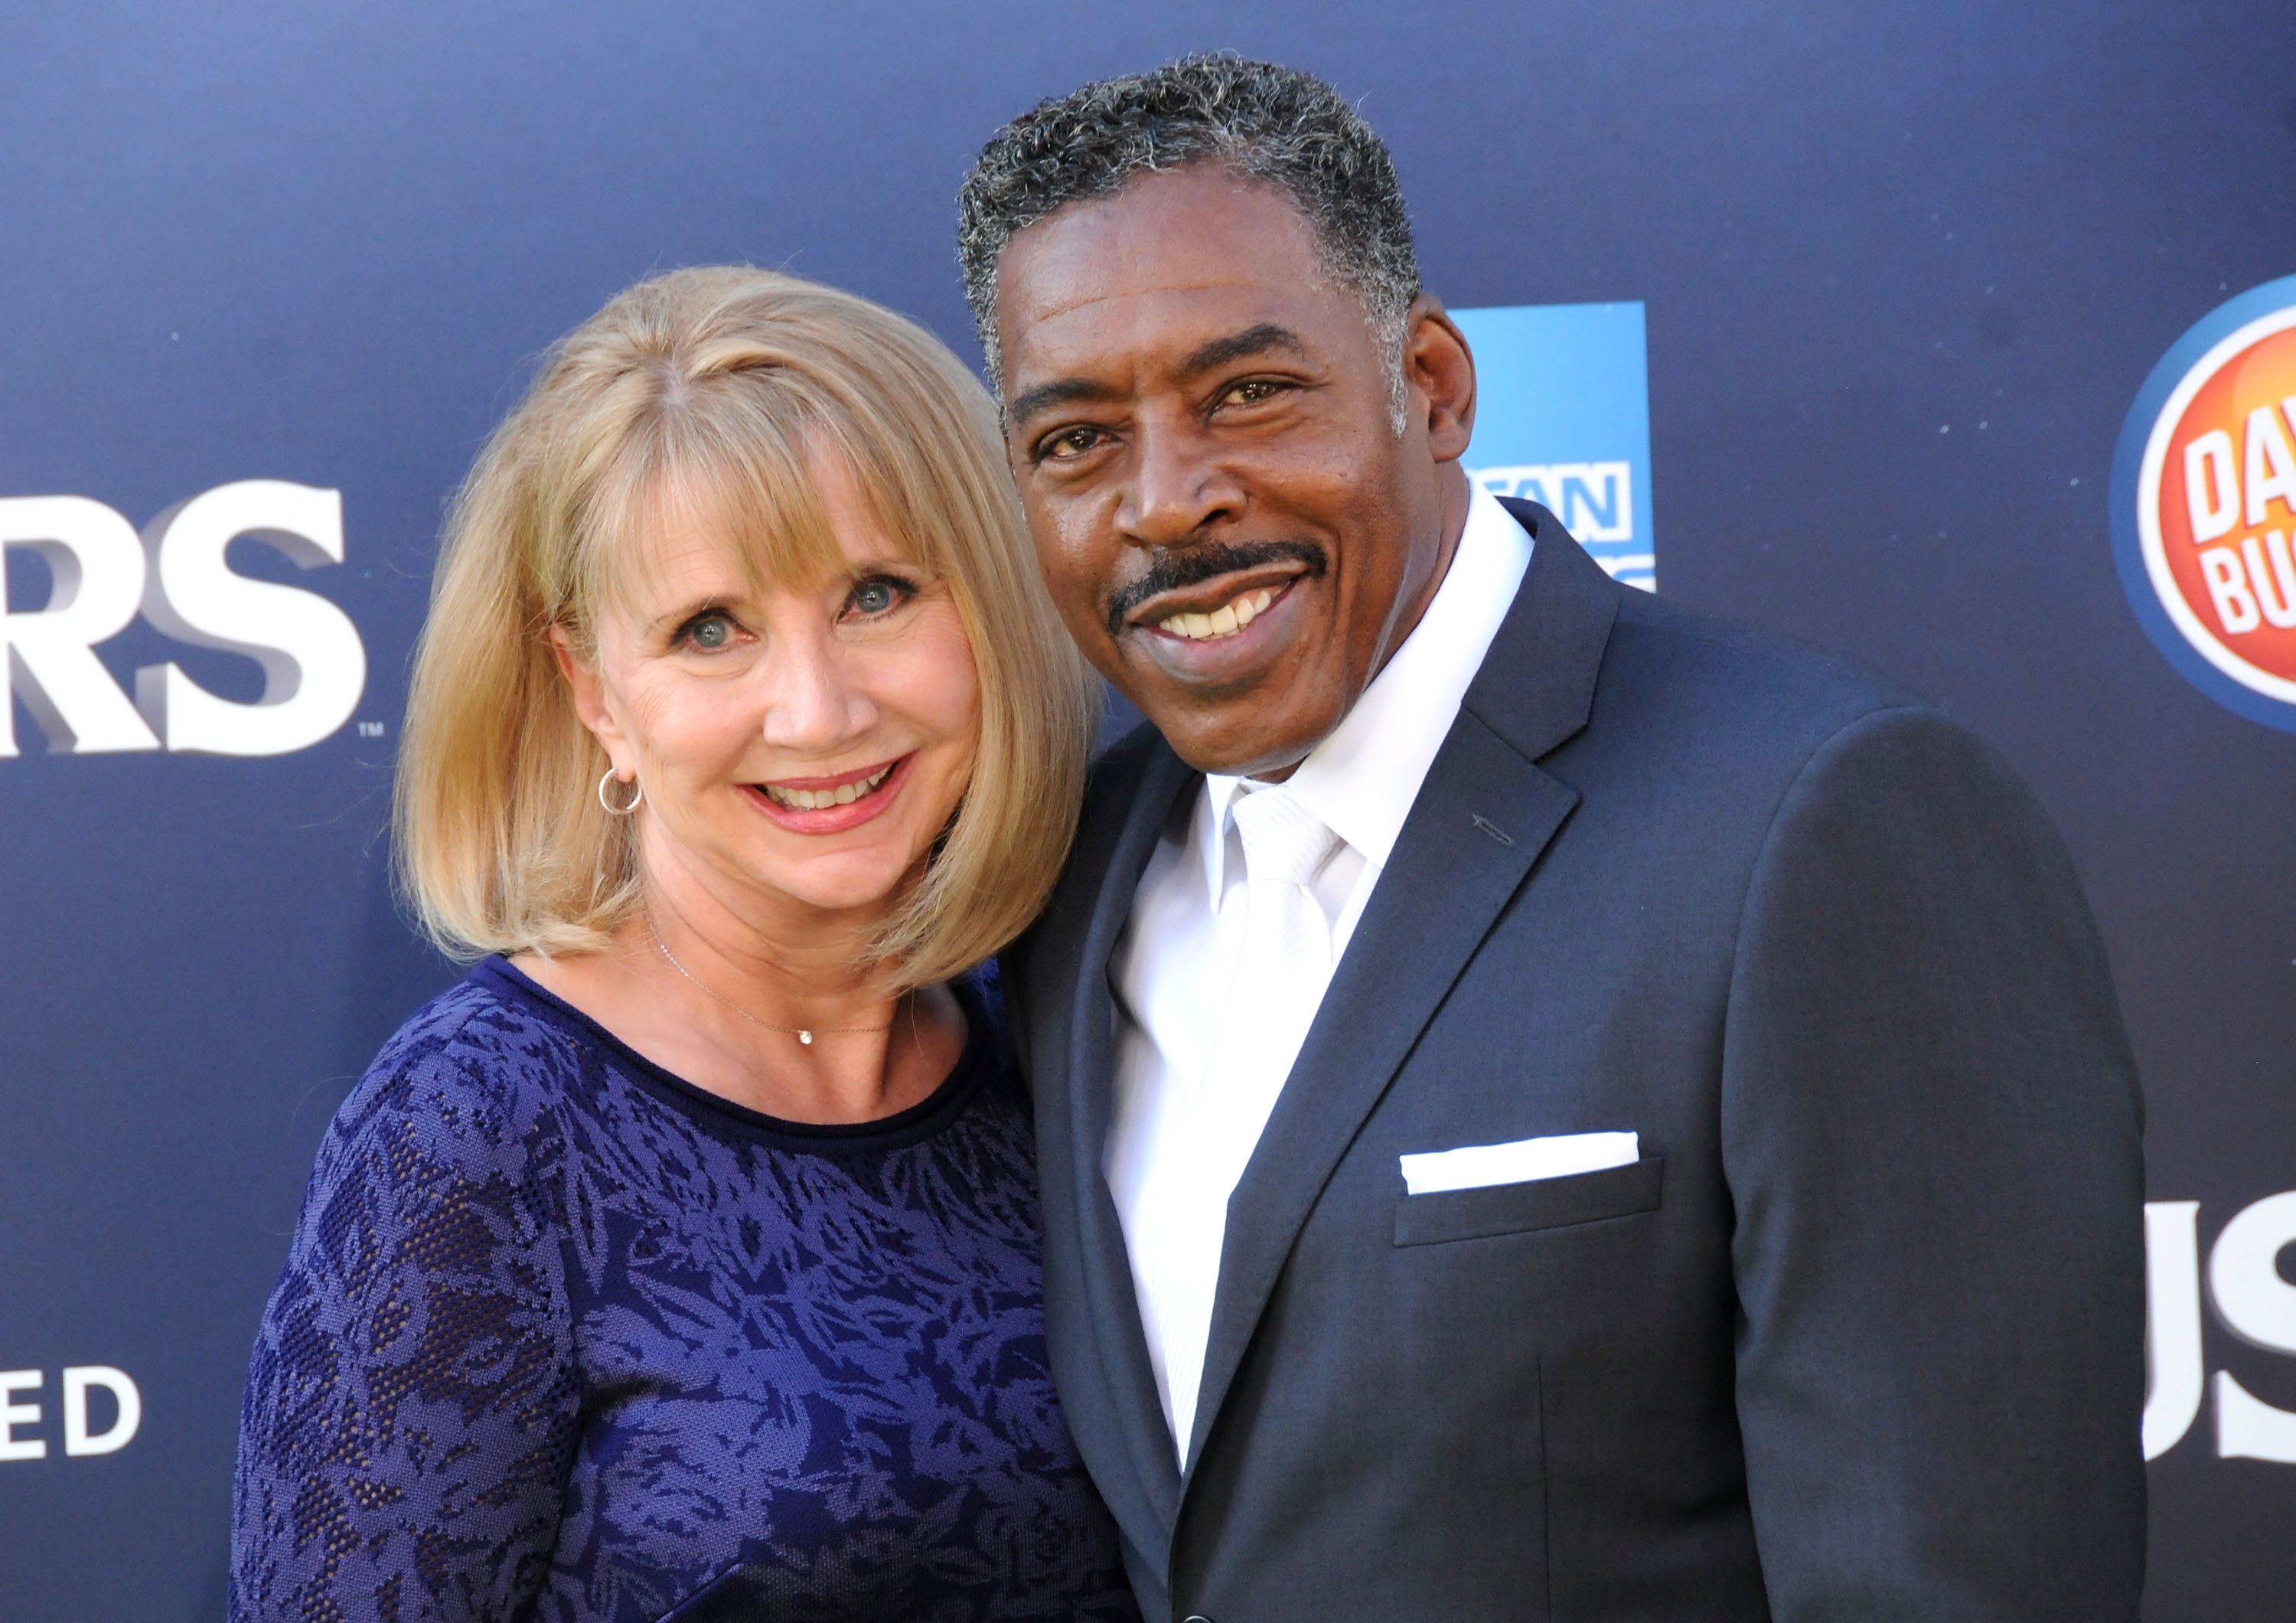 Ernie Hudson and wife Linda Kingsberg attend the premiere of "Ghostbusters" on July 9, 2016, in Hollywood, California. | Source: Getty Images.